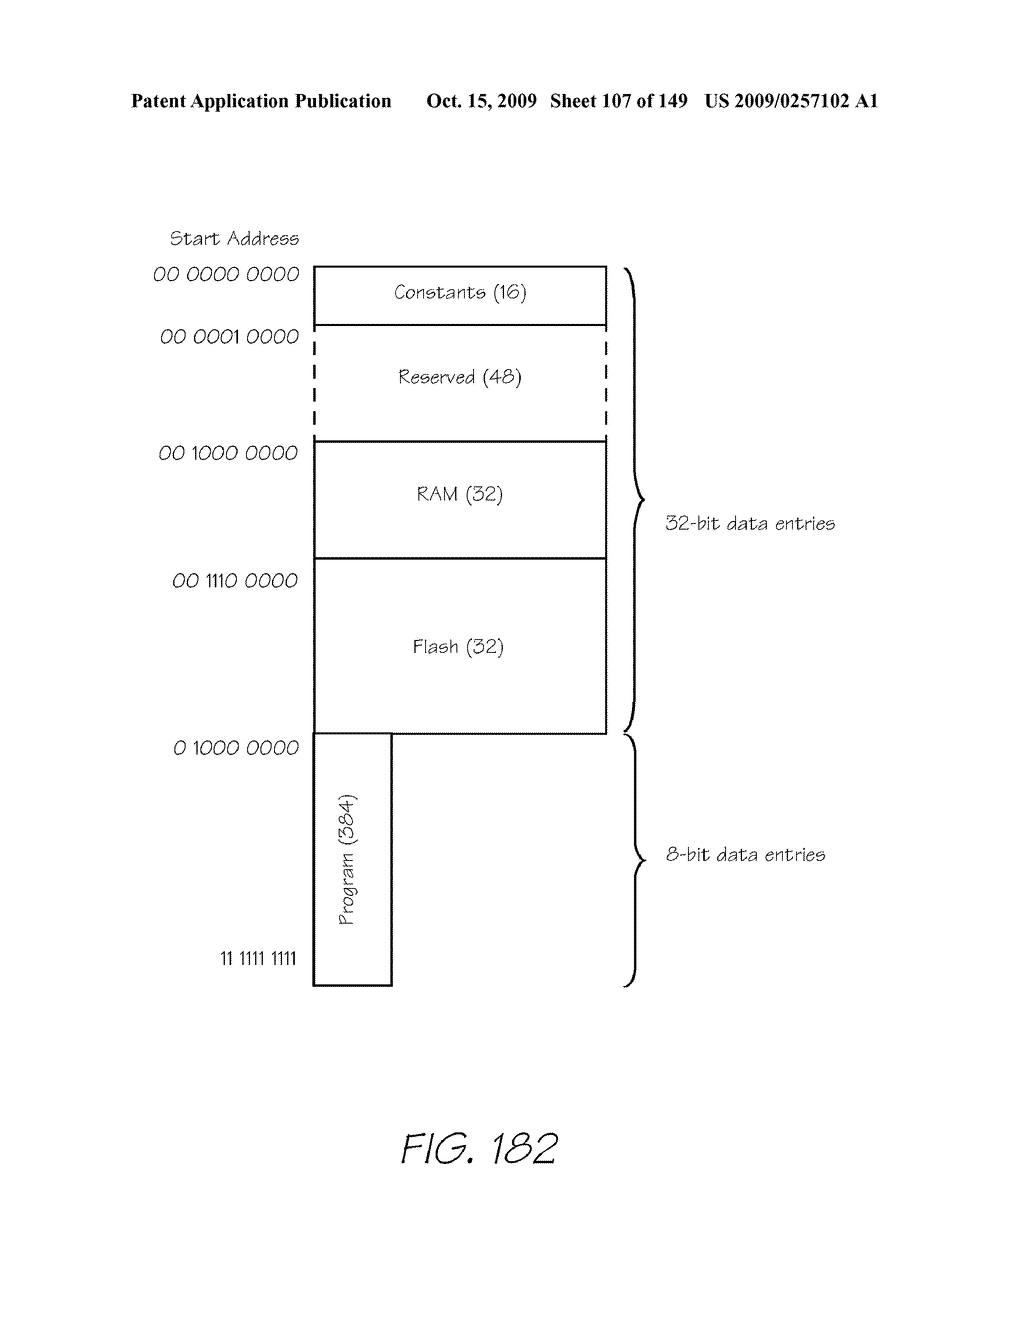 IMAGE PROCESSING APPARATUS HAVING CARD READER FOR APPLYING EFFECTS STORED ON A CARD TO A STORED IMAGE - diagram, schematic, and image 108